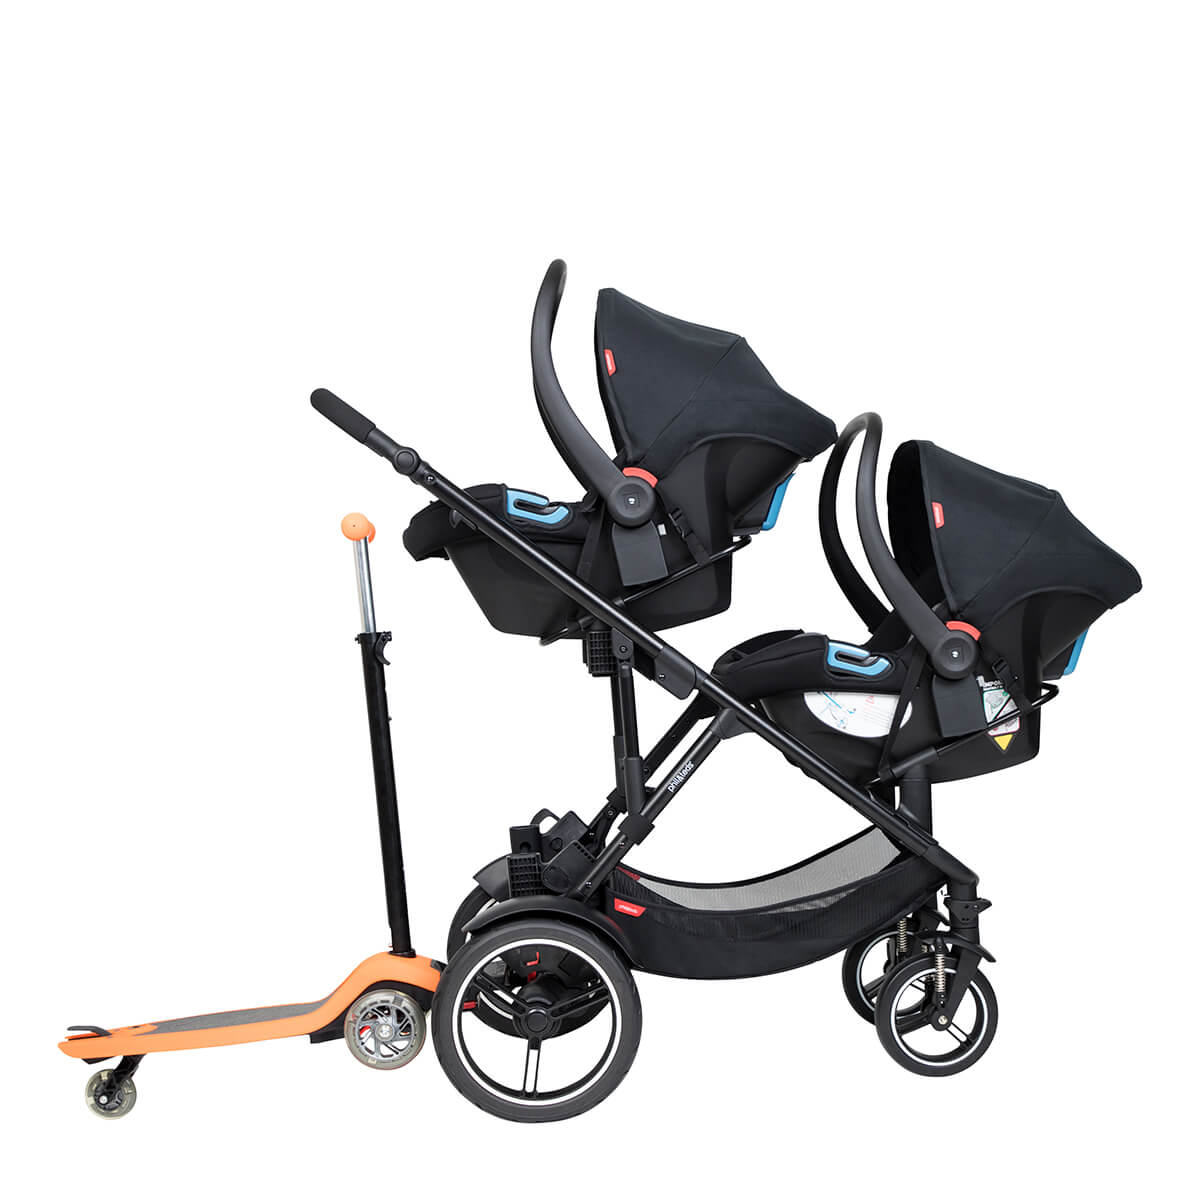 https://cdn.accentuate.io/4394653778008/19272835367000/philteds-voyager-buggy-with-double-travel-systems-and-freerider-stroller-board-in-the-rear-v1626484570974.jpg?1200x1200